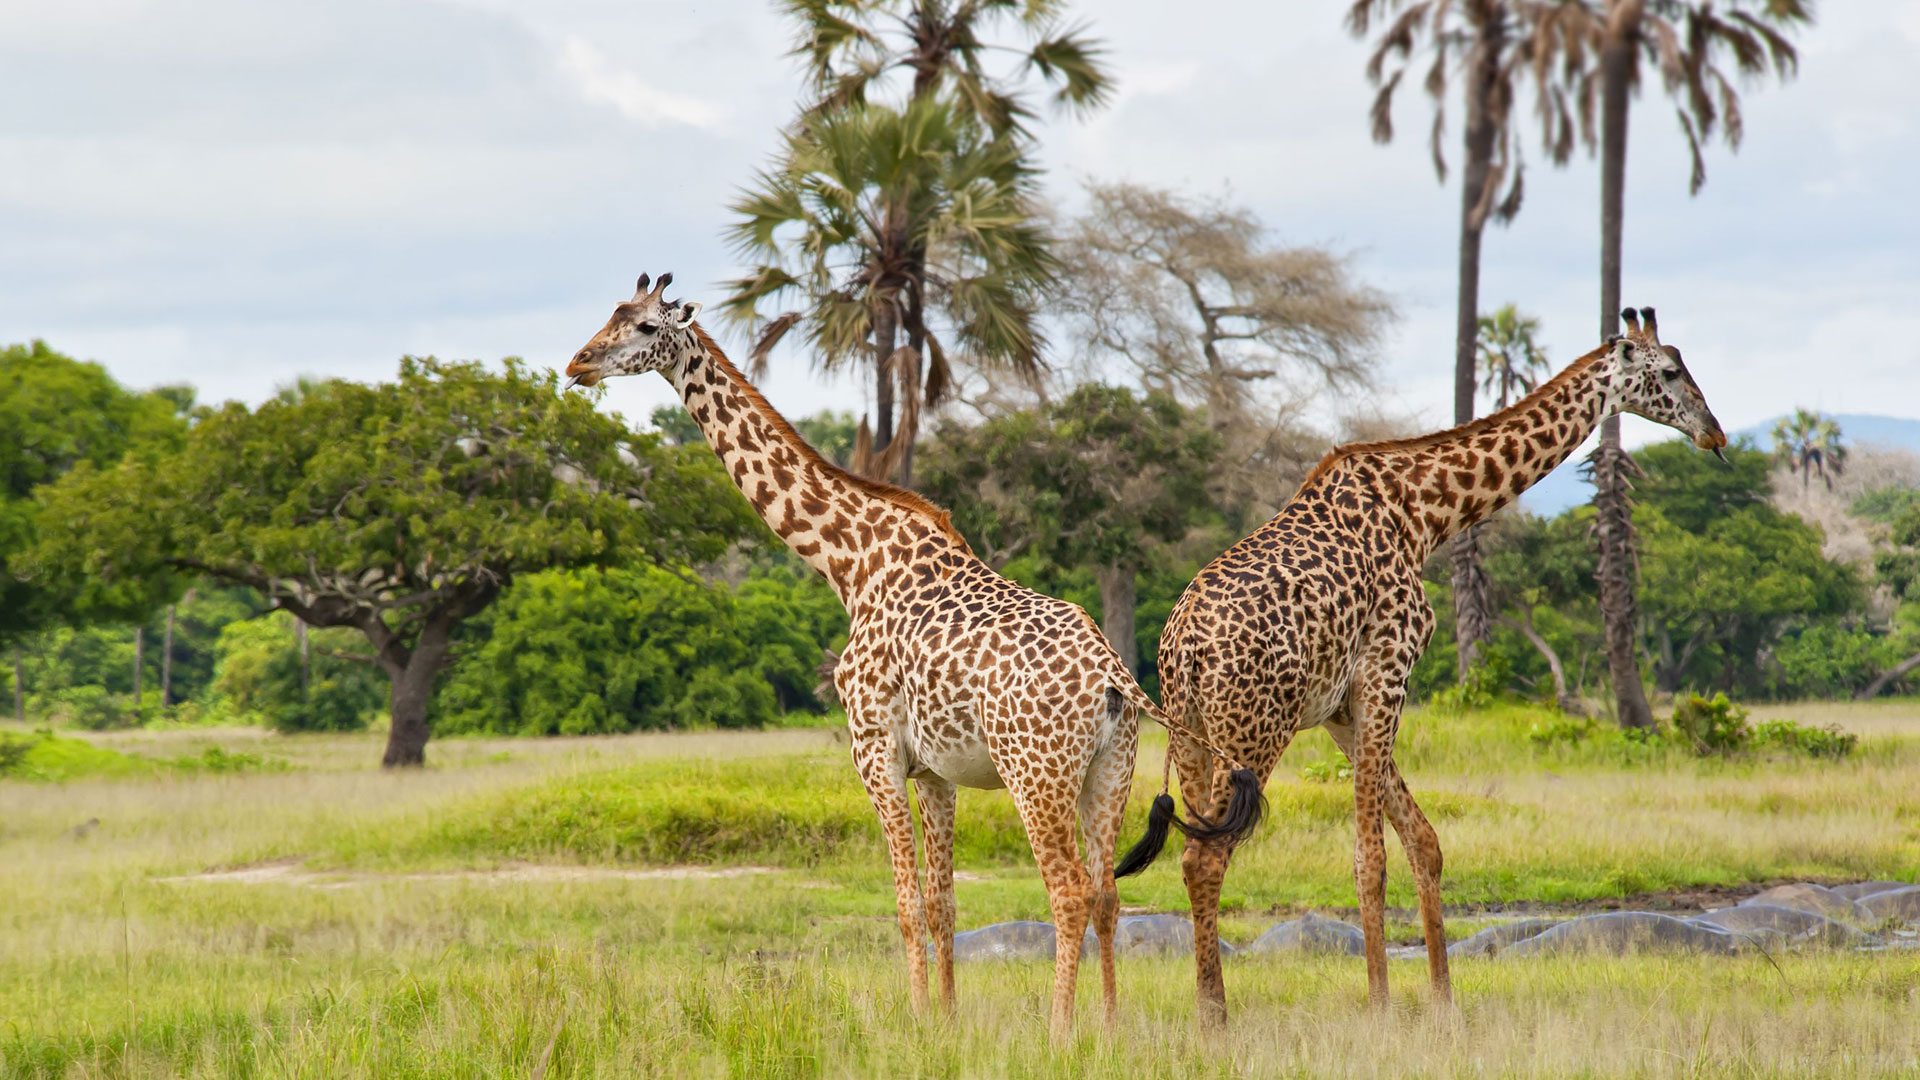 Katavi National Park Tanzania, is the third National Park in Tanzania covering an area of 4471 sq km,